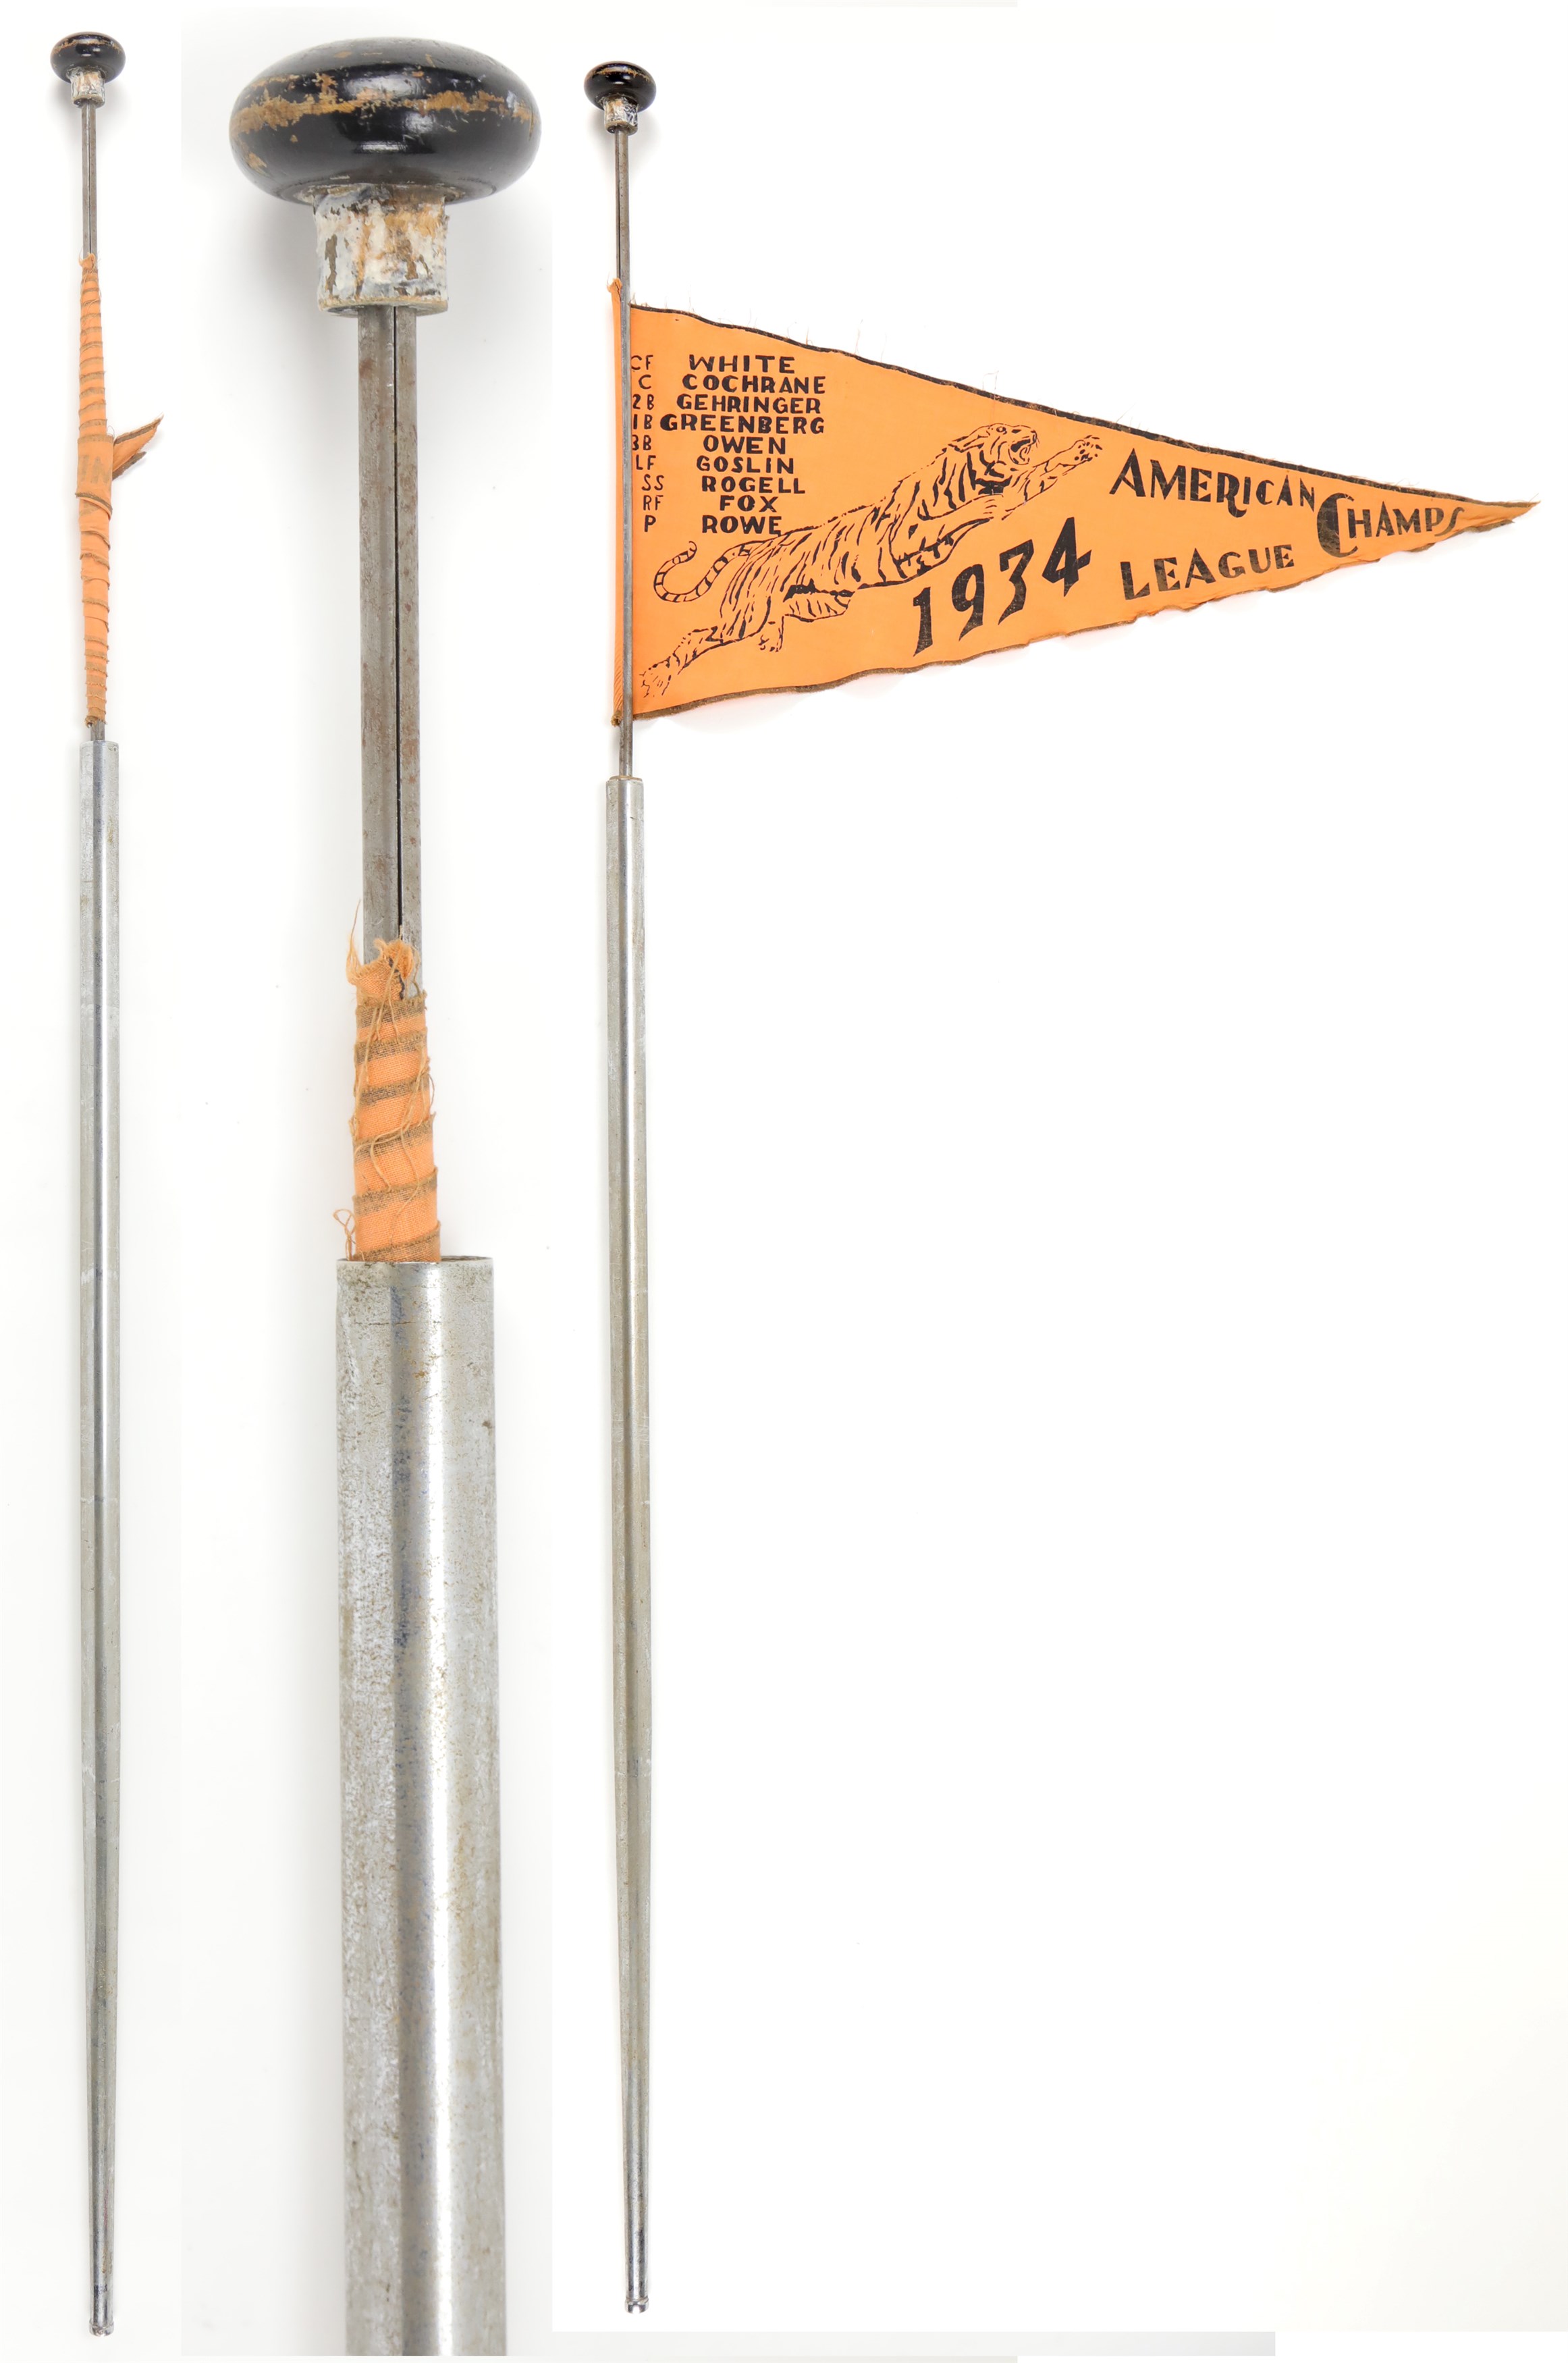 Ty Cobb and Detroit Tigers - 1934 American League Champion Detroit Tigers Pennant Cane